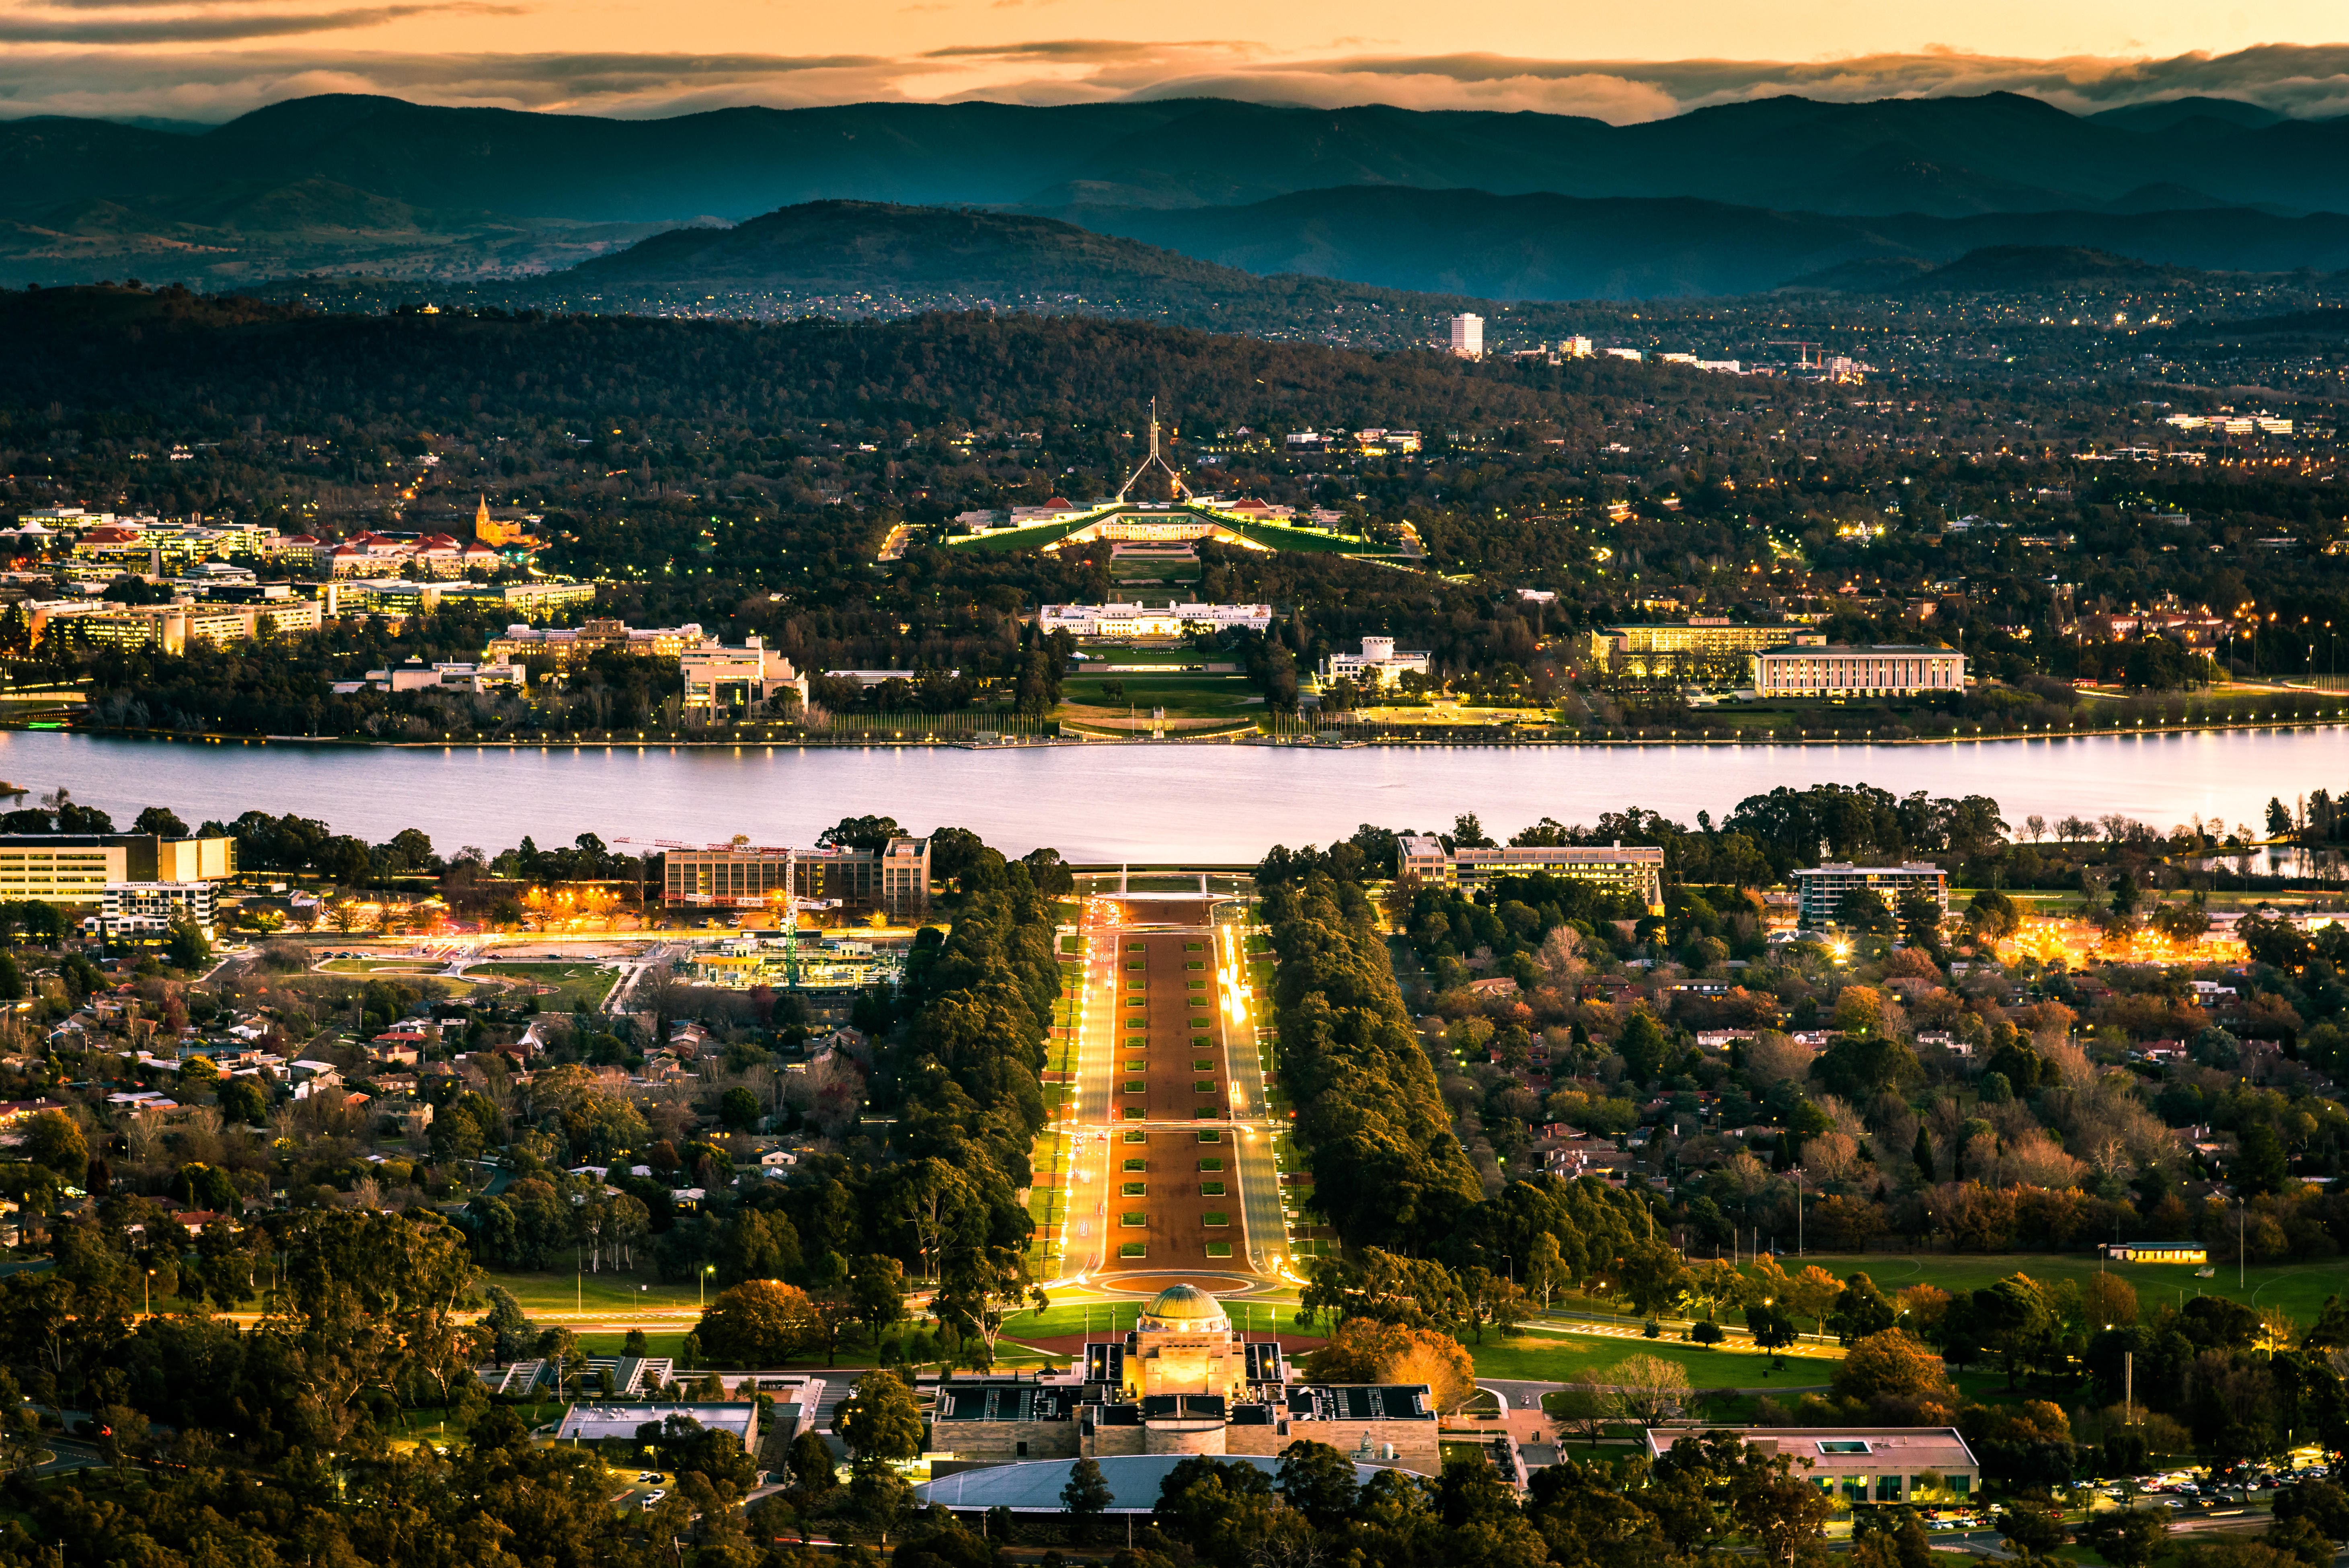 Australia’s capital Canberra, and the country’s Parliament House.